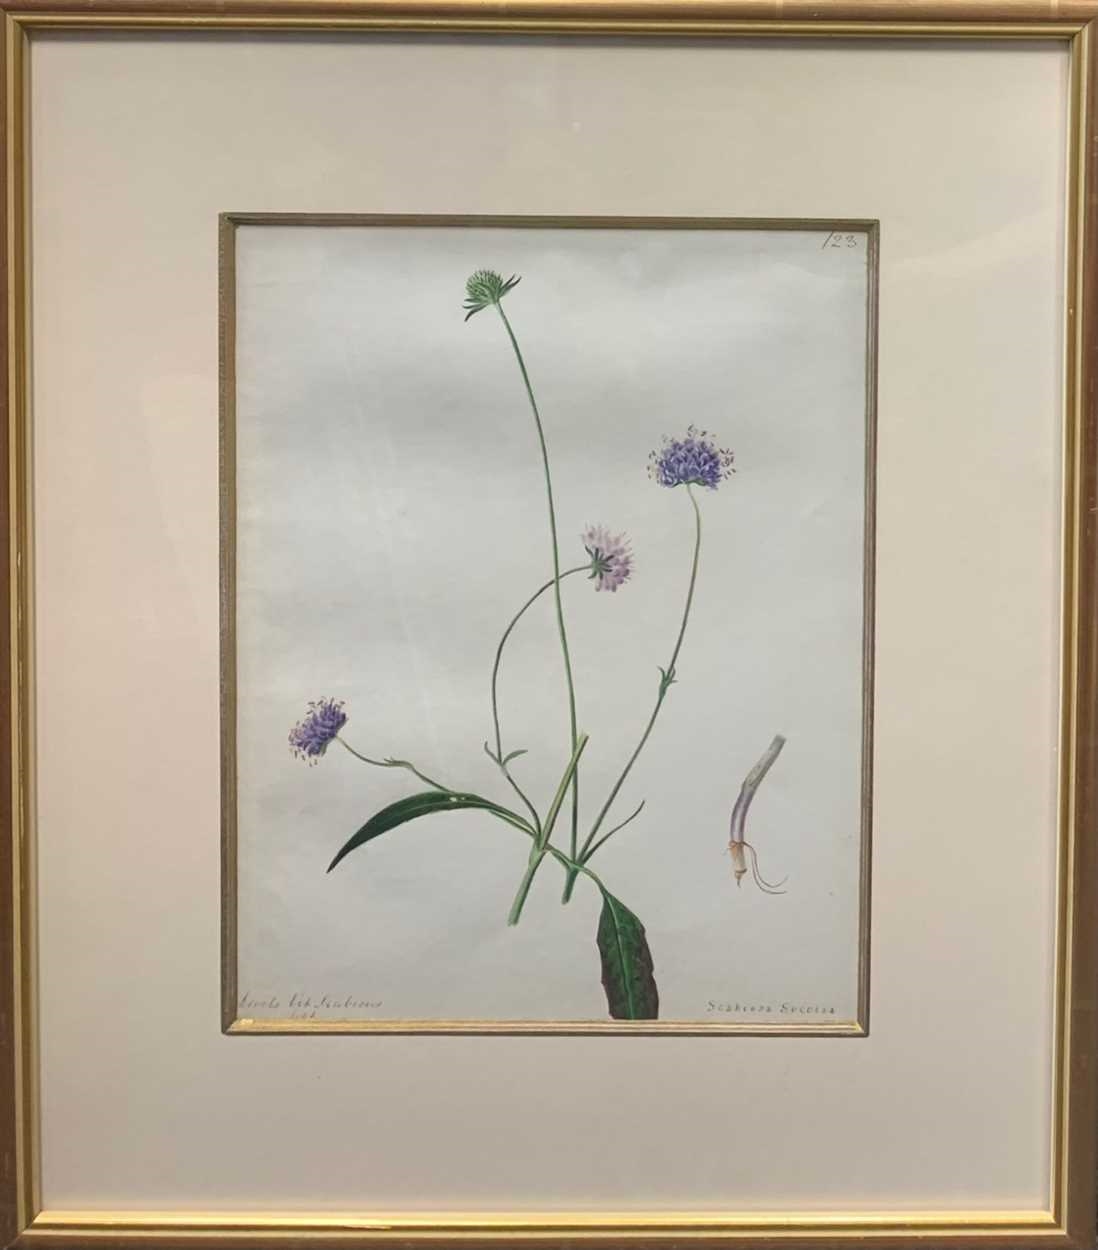 Artwork by Emily Stackhouse, Botanical study of Devil's-bit Scabious (Scabiosa Succisa), Made of watercolour on Whatman paper watermarked